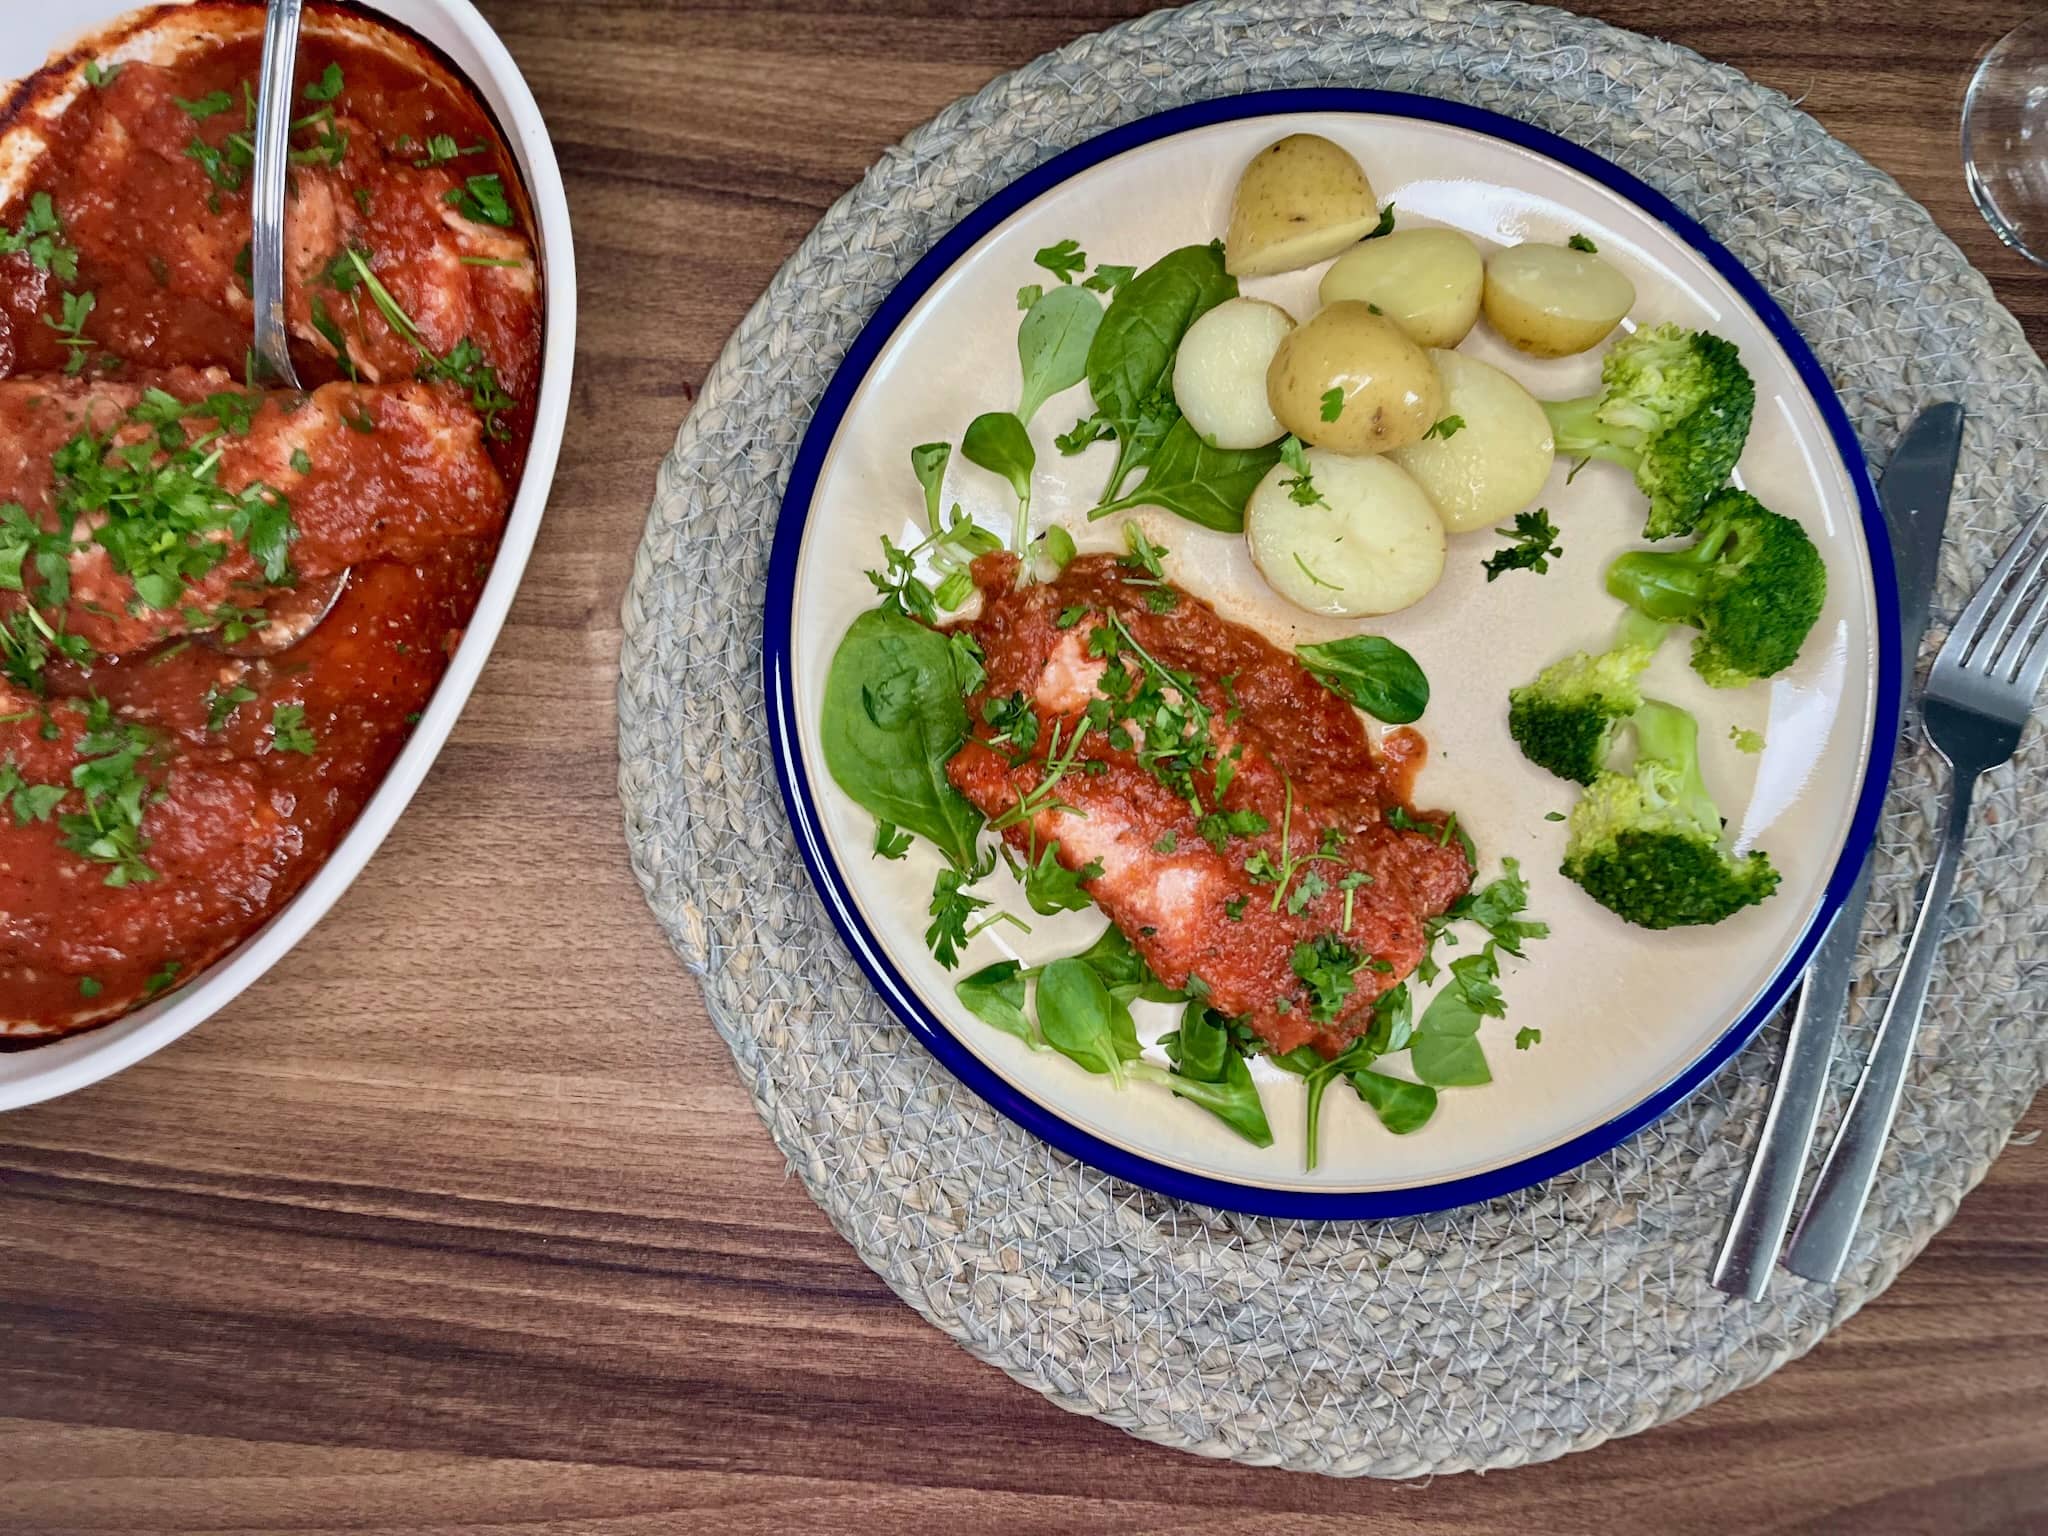 A plate with potion of oven-baked salmon in tomato sauce, with potatoes, broccoli, and a mixed salad with spinach